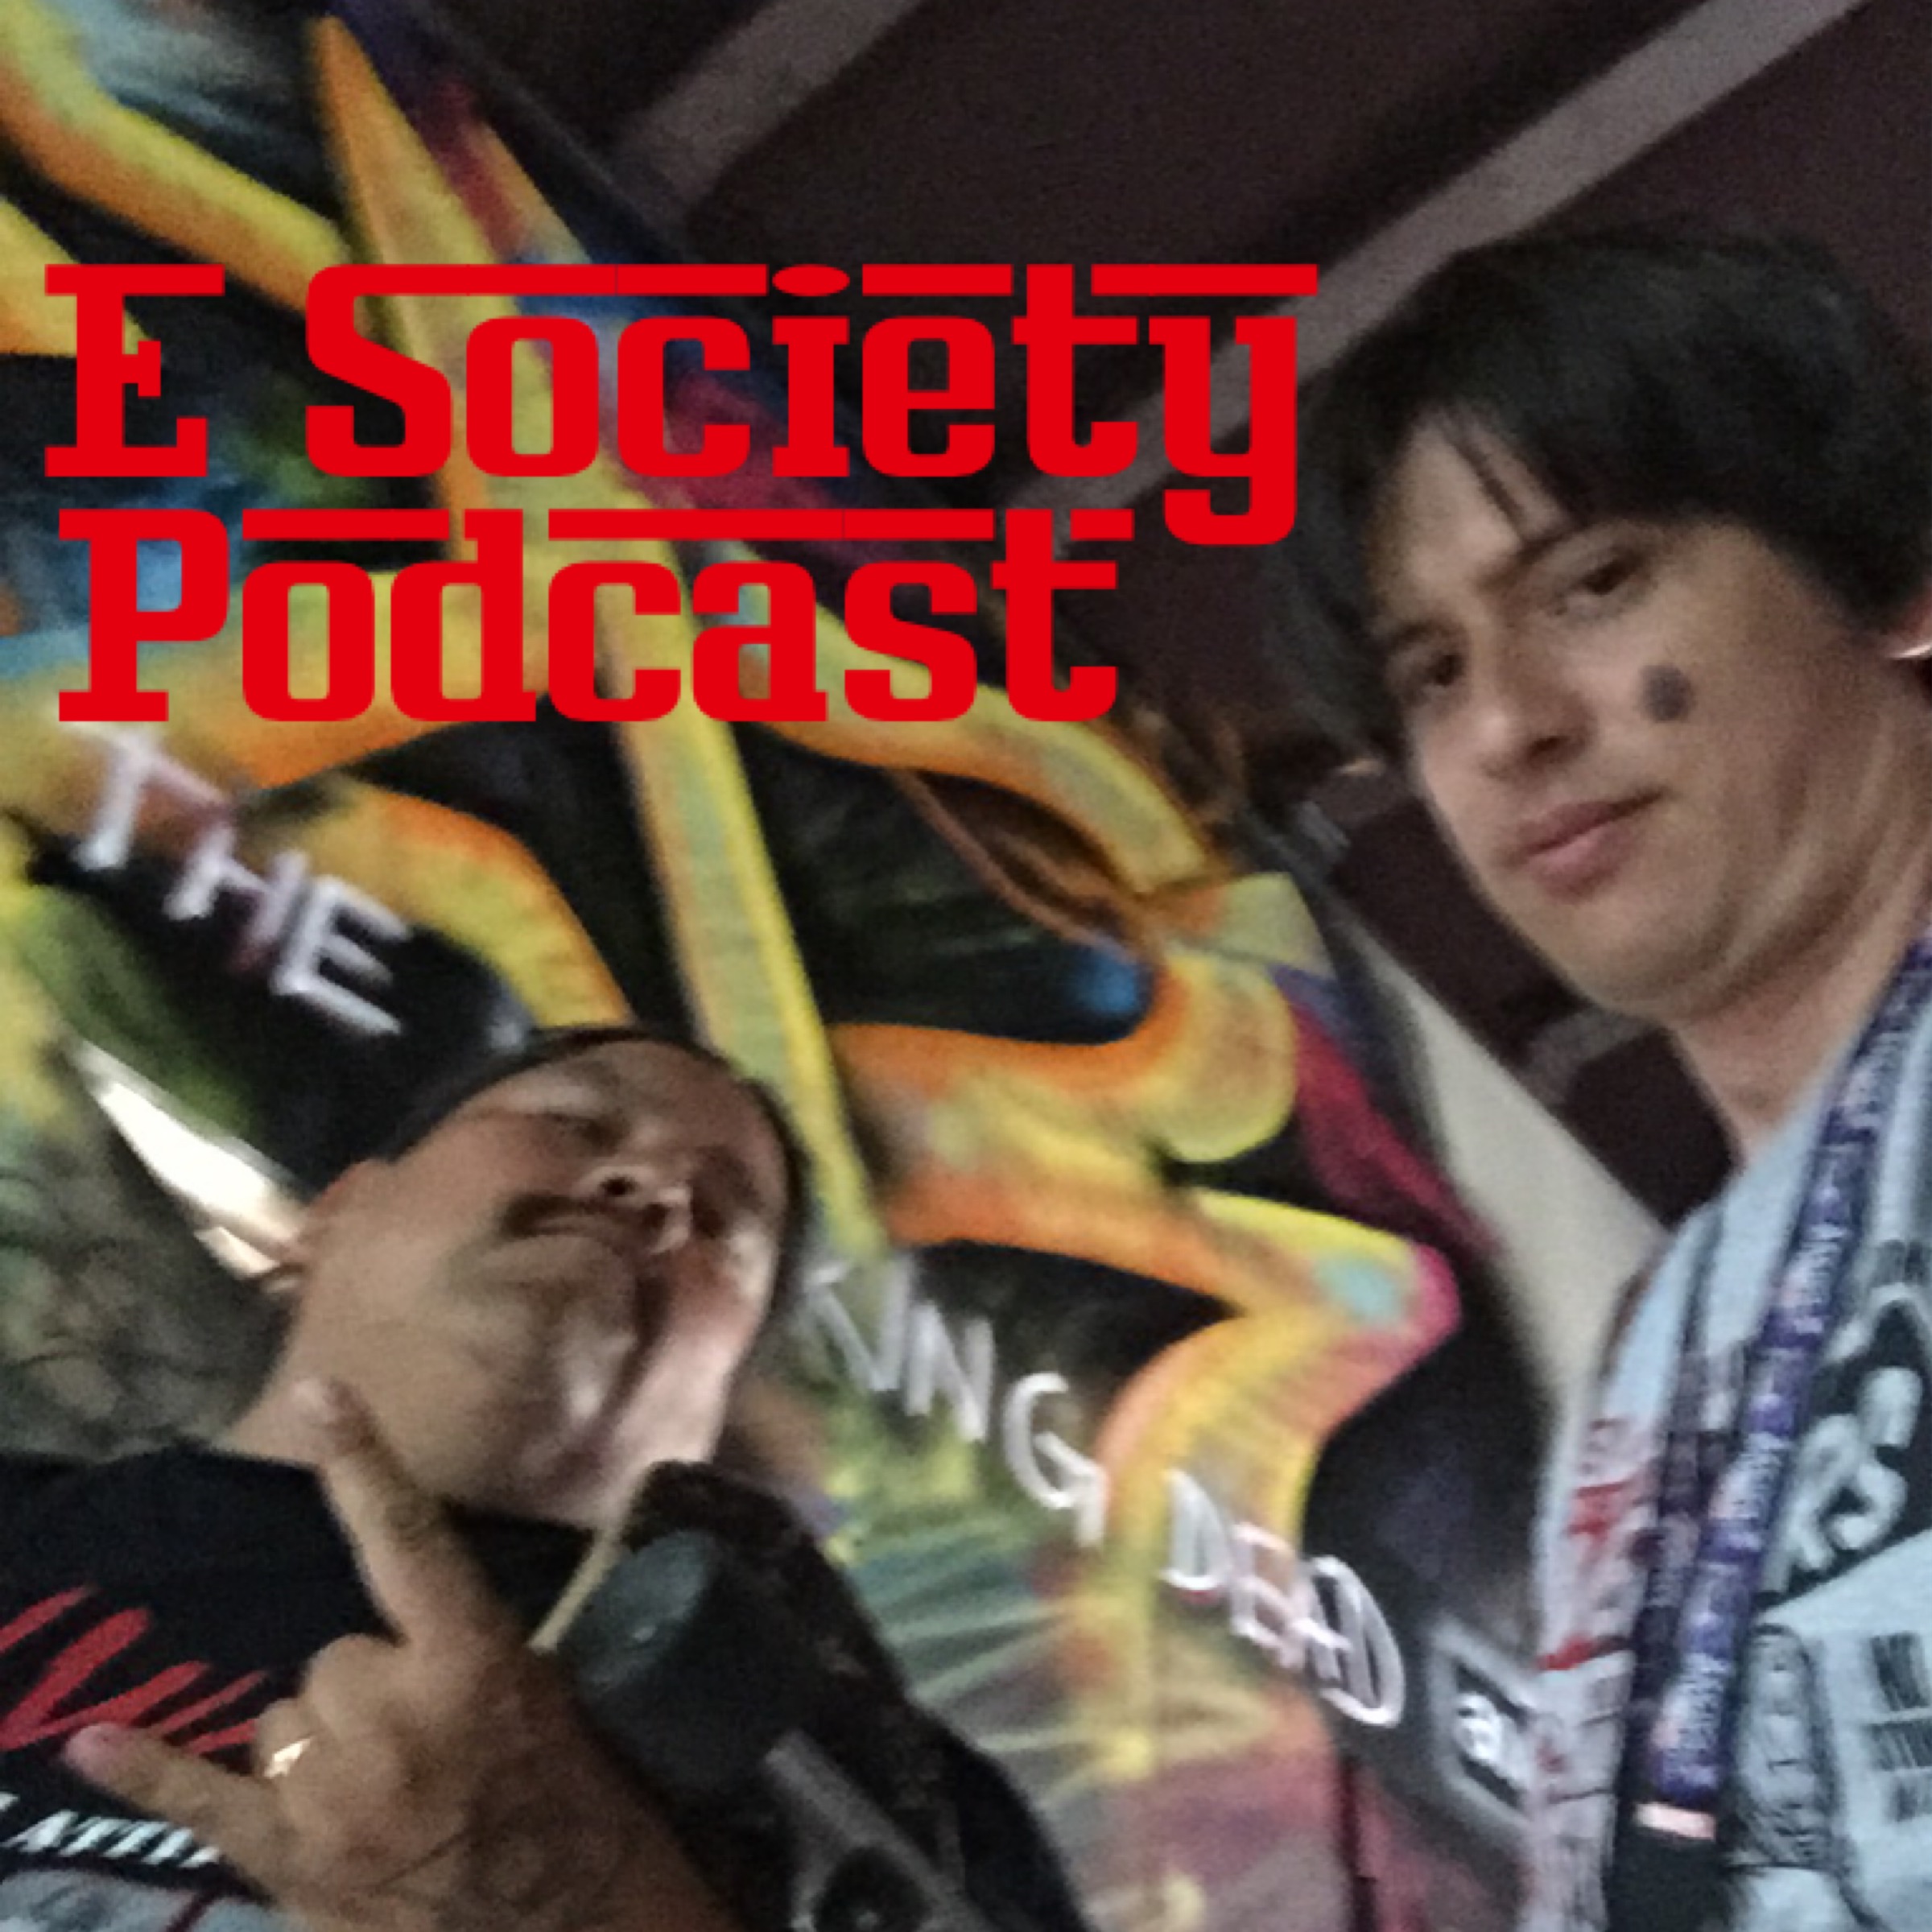 E Society Podcast - Ep. 62: Channeling the Dragon and the Wolf